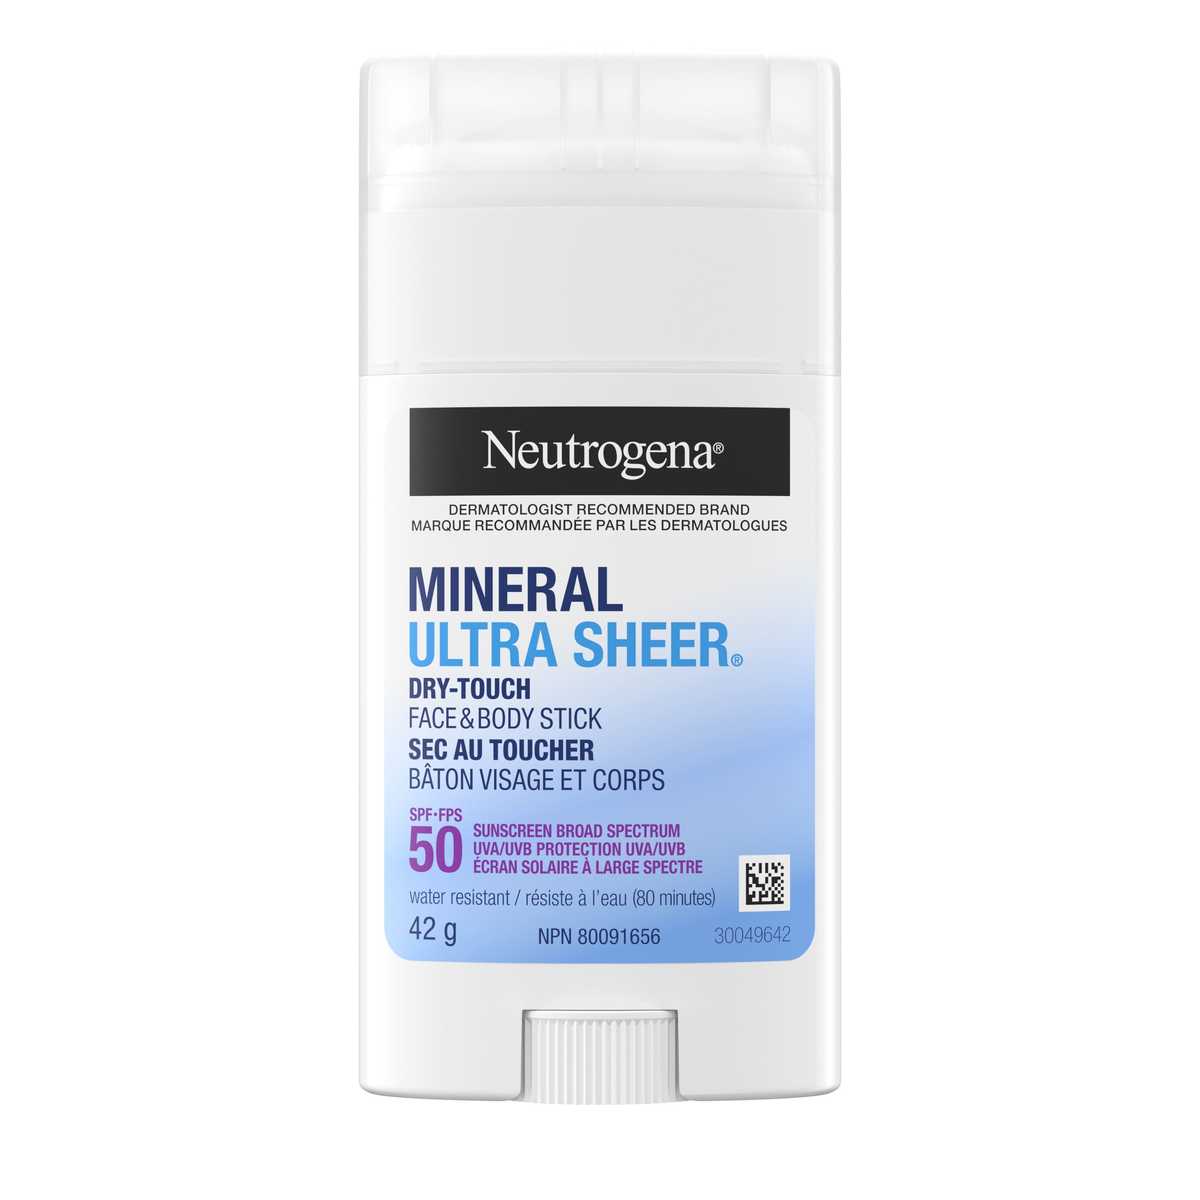 Neutrogena Mineral Ultra Sheer Dry-Touch Face & Body Stick Sunscreen with SPF 50, 42g